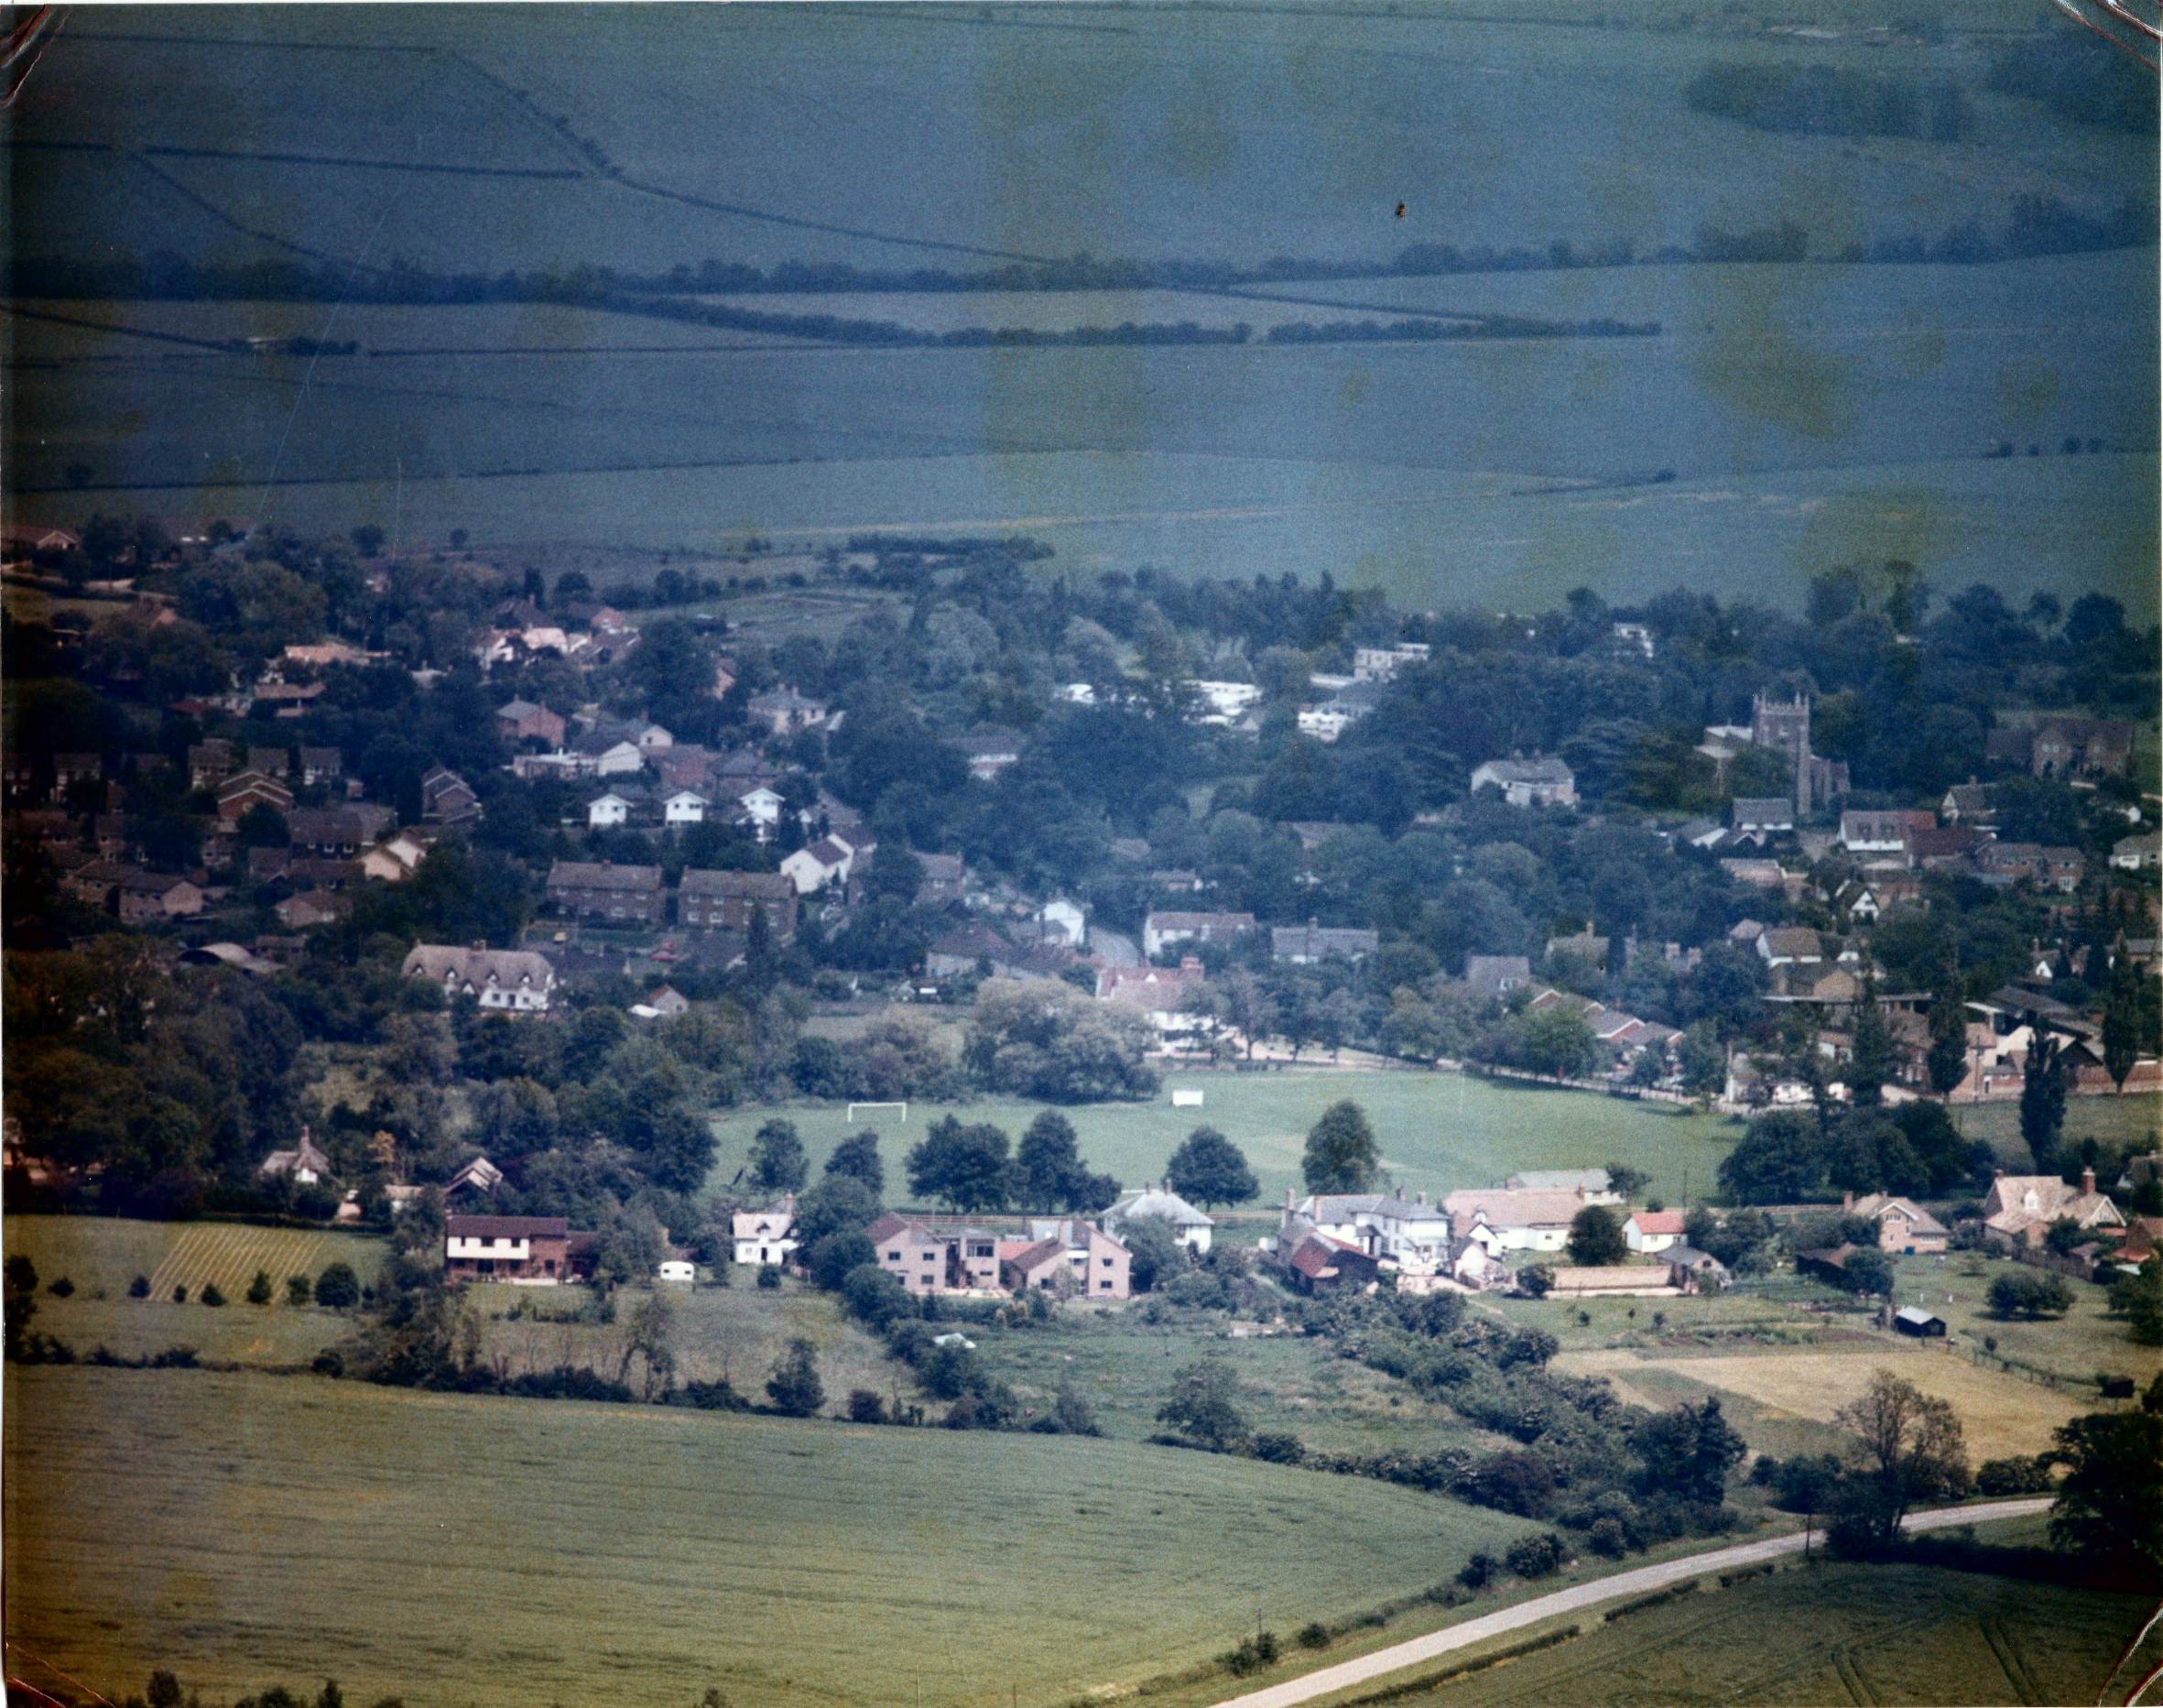 Elsworth from the air in 1987